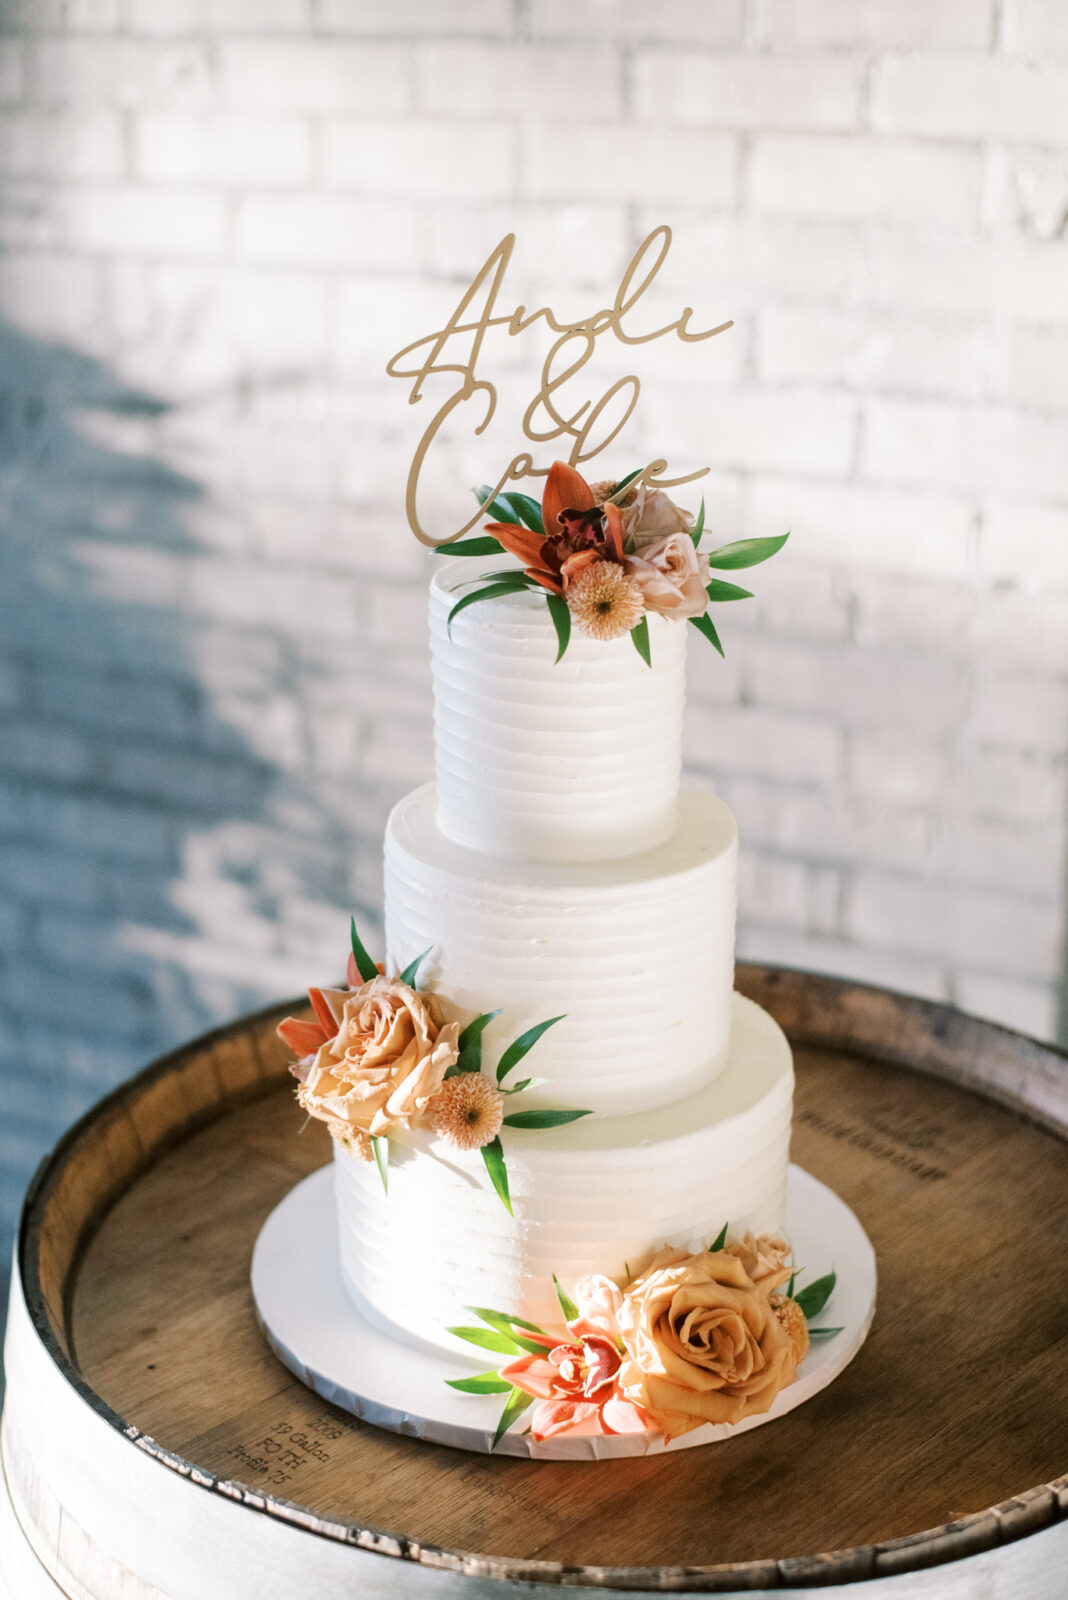 Tiered white wedding cake featuring florals in a fall themed palette by The Art of Cake, three tiered wedding cake inspiration, delicate custom cake topper of the bride and groom's names